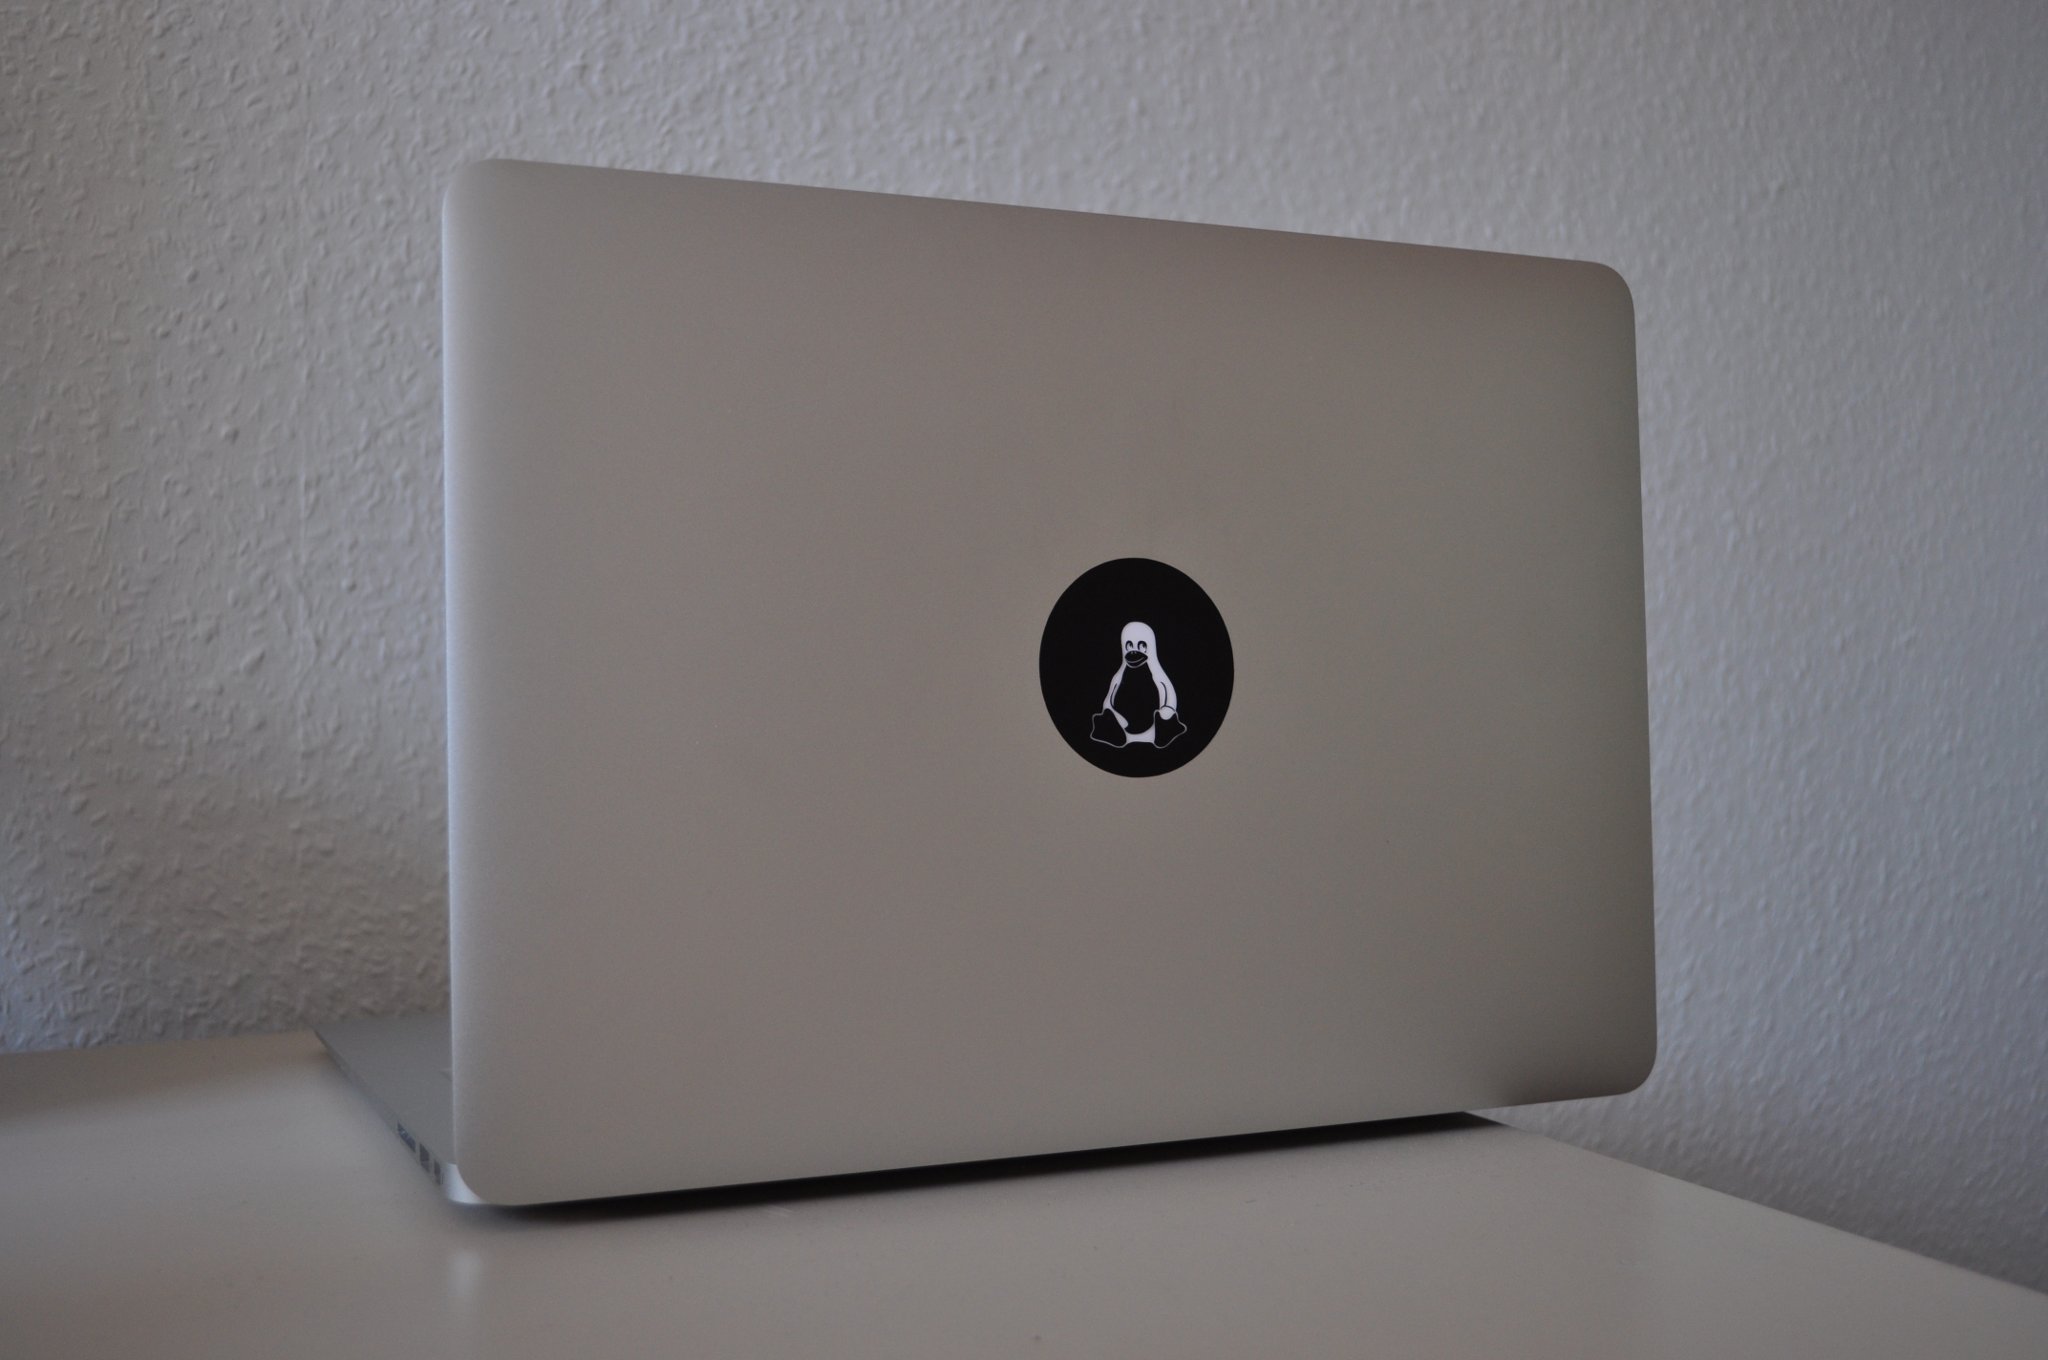 Apple “Stickers” Ad for MacBook Air is “The notebook people love” [Video]